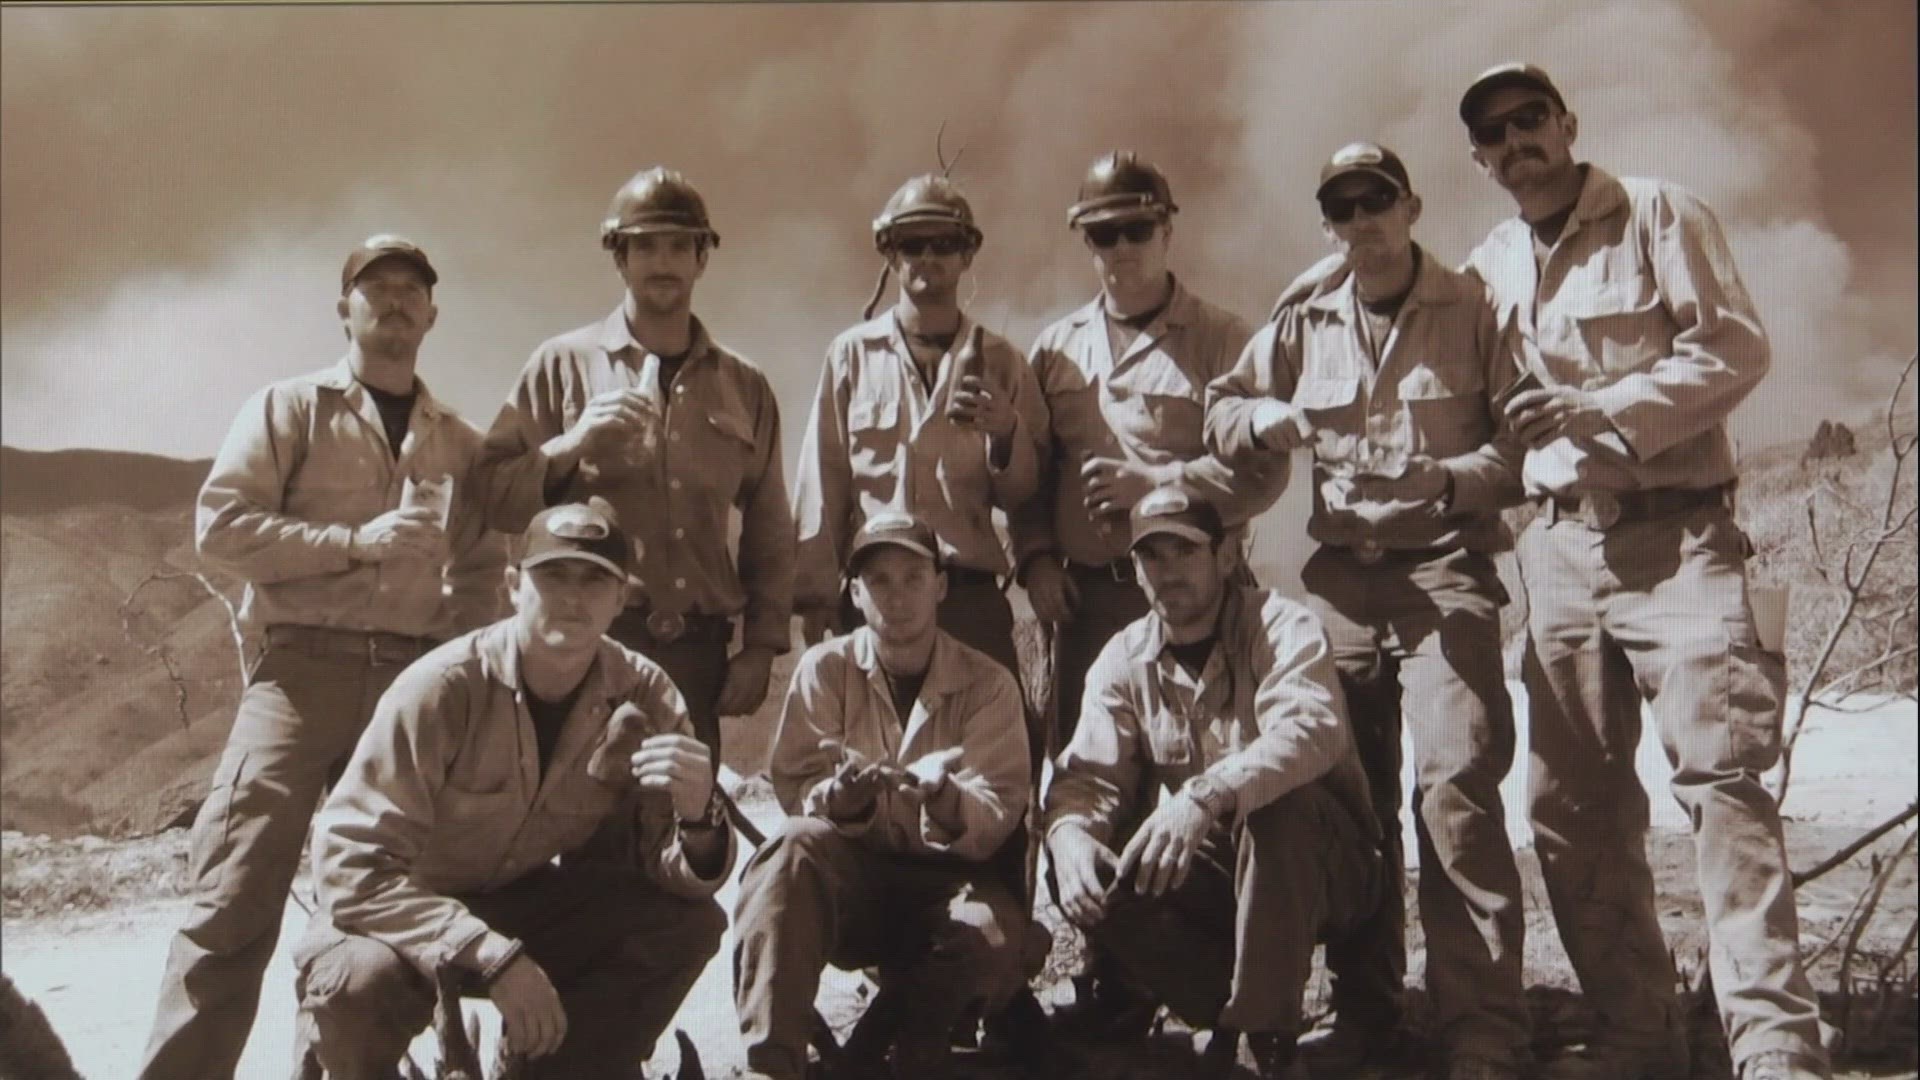 The Granite Mountain Hotshots weren't just a firefighting crew. They were Prescott's Crew. Even 10 years after their deaths, they're still cherished.